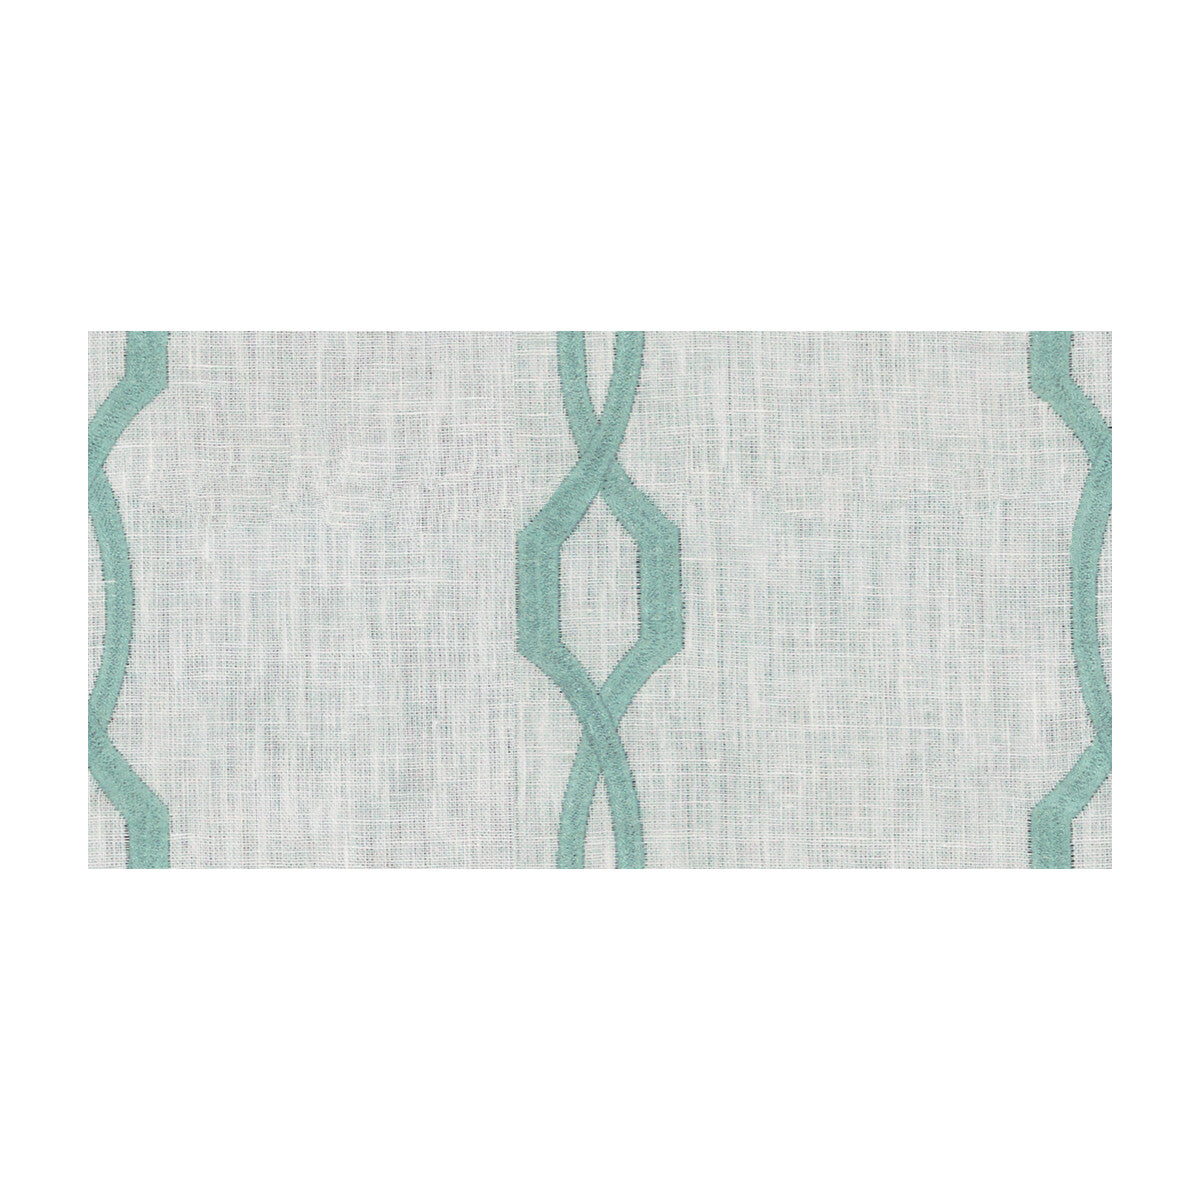 Teton fabric in spa color - pattern 4187.15.0 - by Kravet Design in the Candice Olson collection